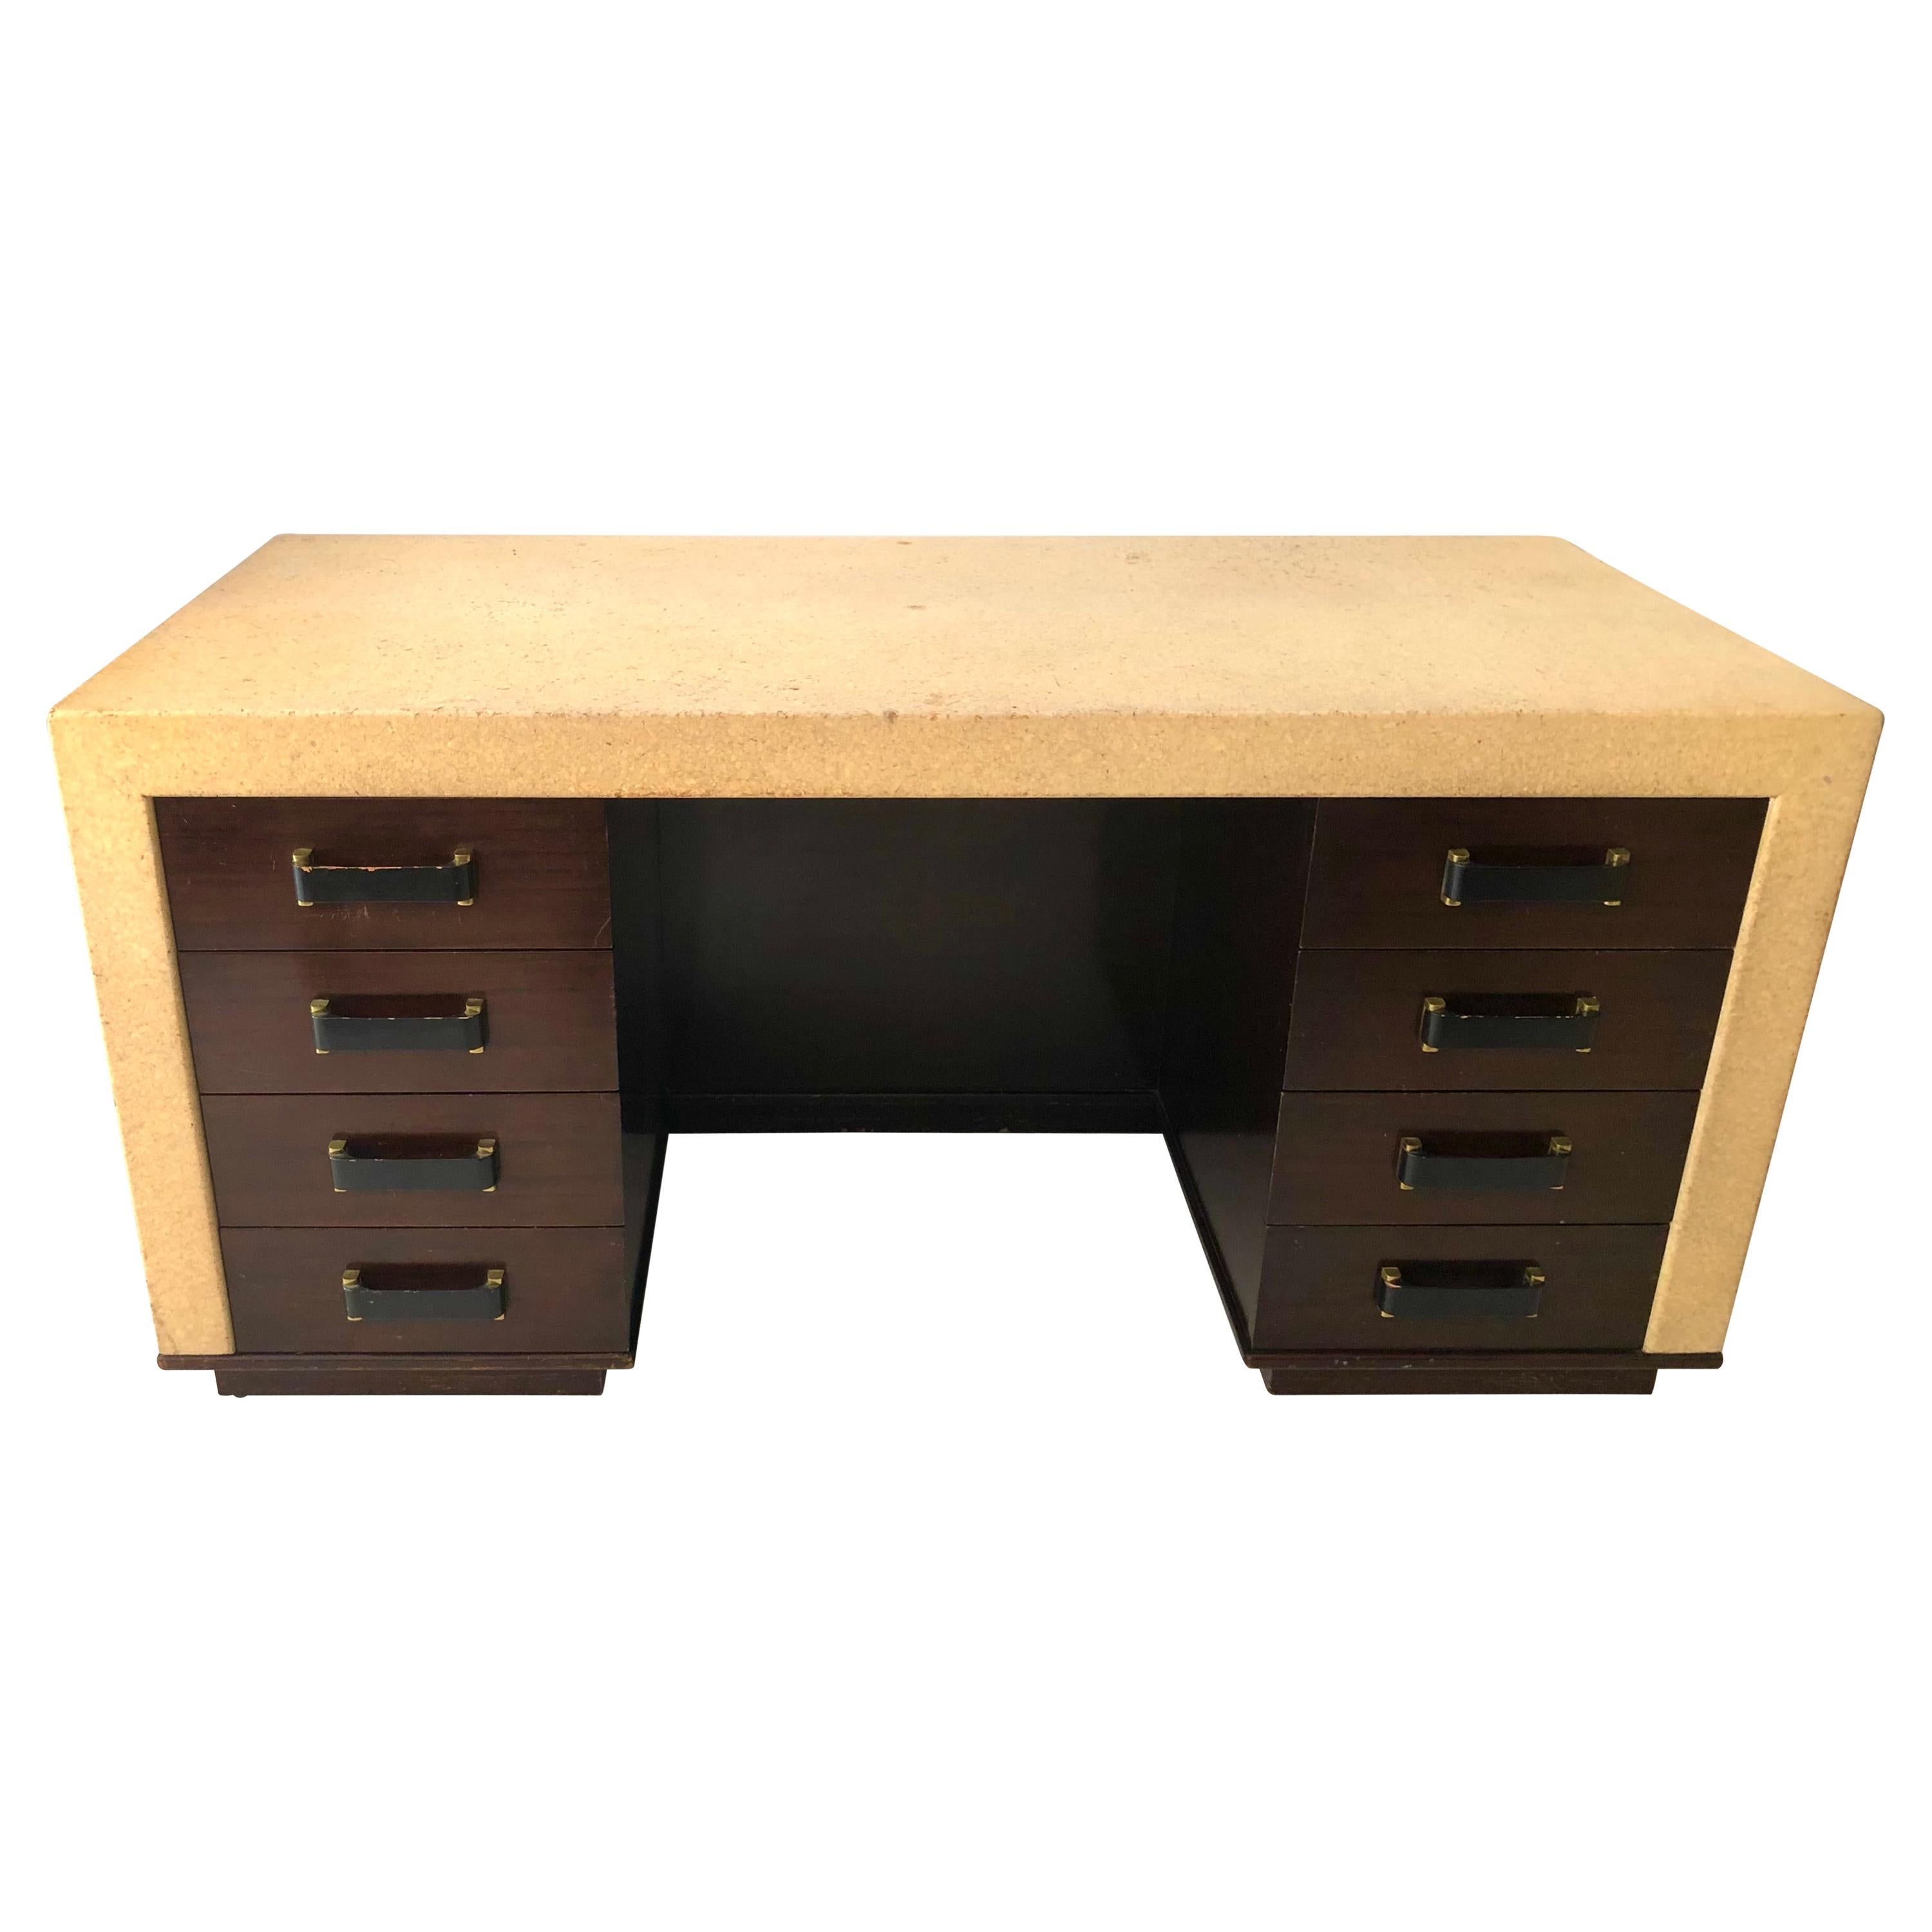 Rare Paul Frankl Cork and Mahogany Kneehole Desk For Sale